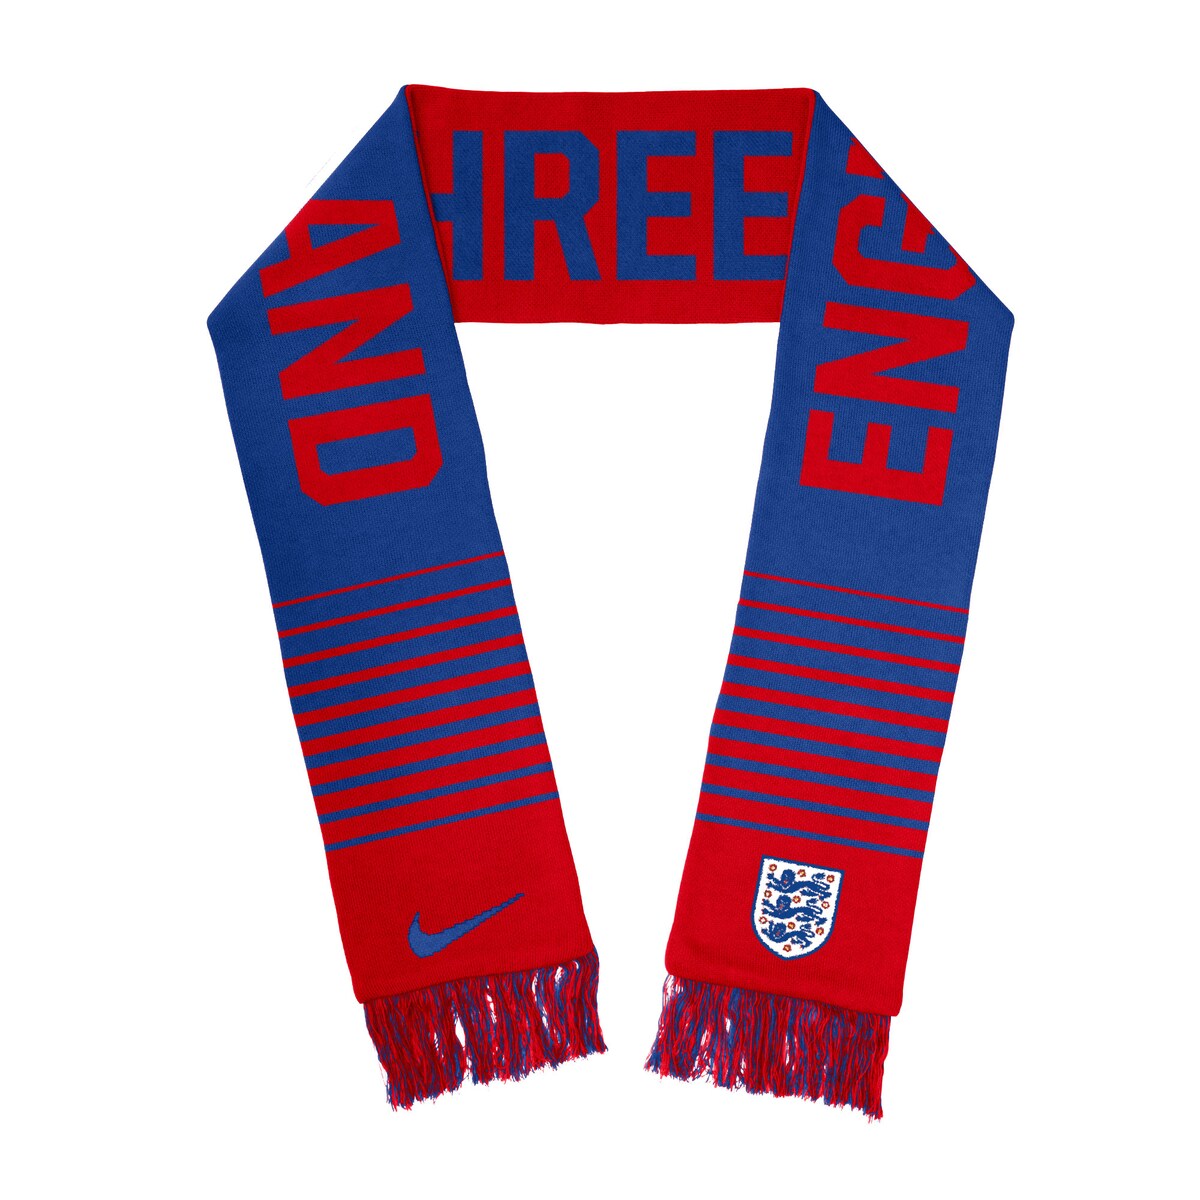 Show your devotion to your England National Team with this Local Verbiage scarf from Nike. It features double-sided graphics and fringe on both ends. This scarf makes the perfect accent for any match day look.Embroidered fabric appliqueOfficially licensedMaterial: 100% AcrylicFringe endsMachine wash, tumble dry lowImportedBrand: NikeWoven graphicsDouble-sided designMeasures approx. 60'' x 6''